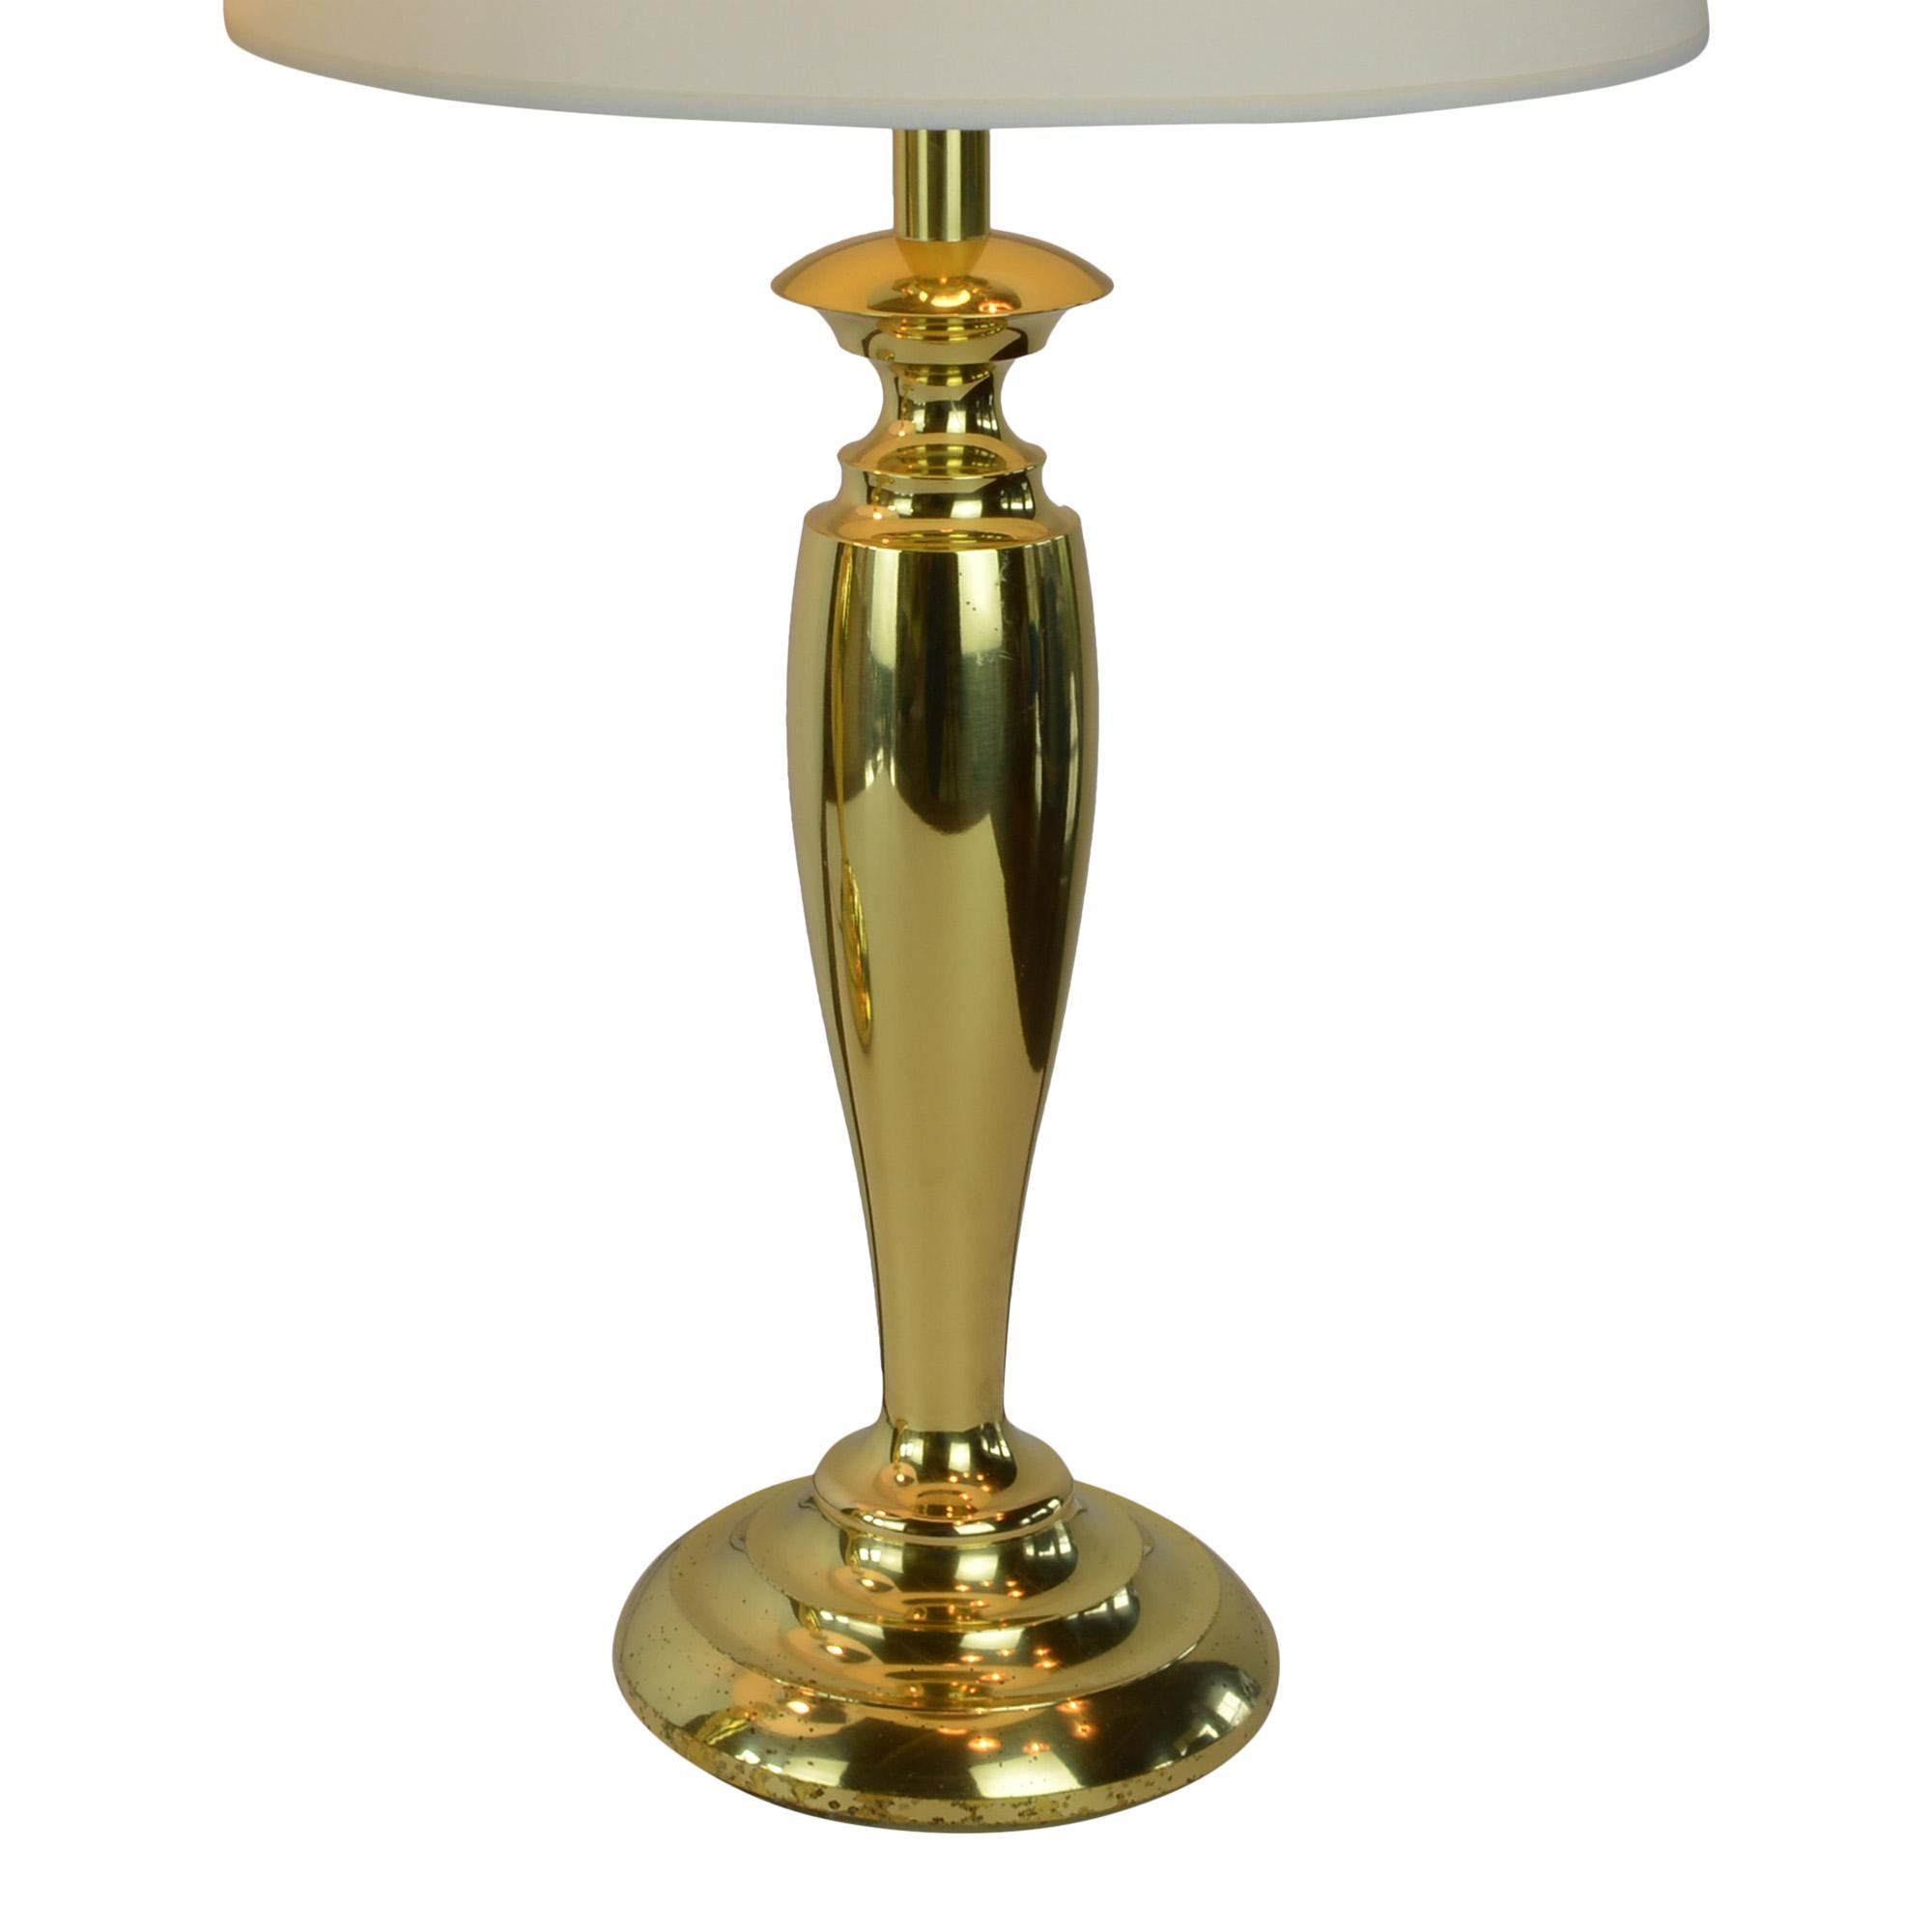 Pair of classic Mid-Century Modern table lamps with new white drum shades are sure to complete a clean modern look in any room. The pair of lamps have the matching finial at top. The manufacturer label is on socket of one lamp.